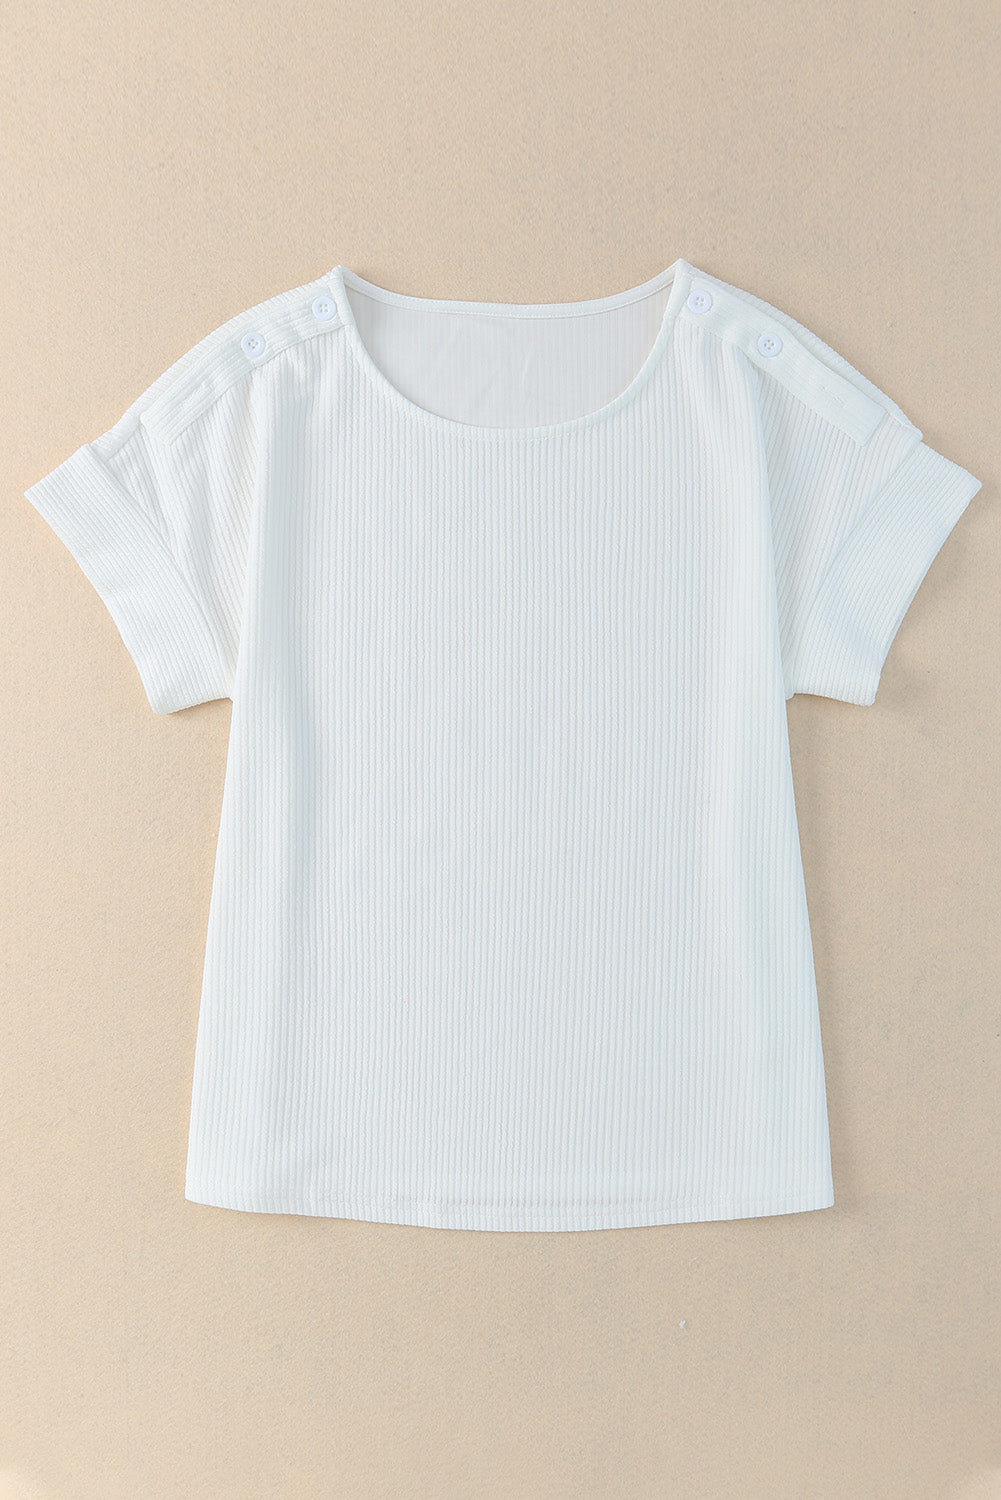 White Ribbed Texture Buttoned Shoulder Top